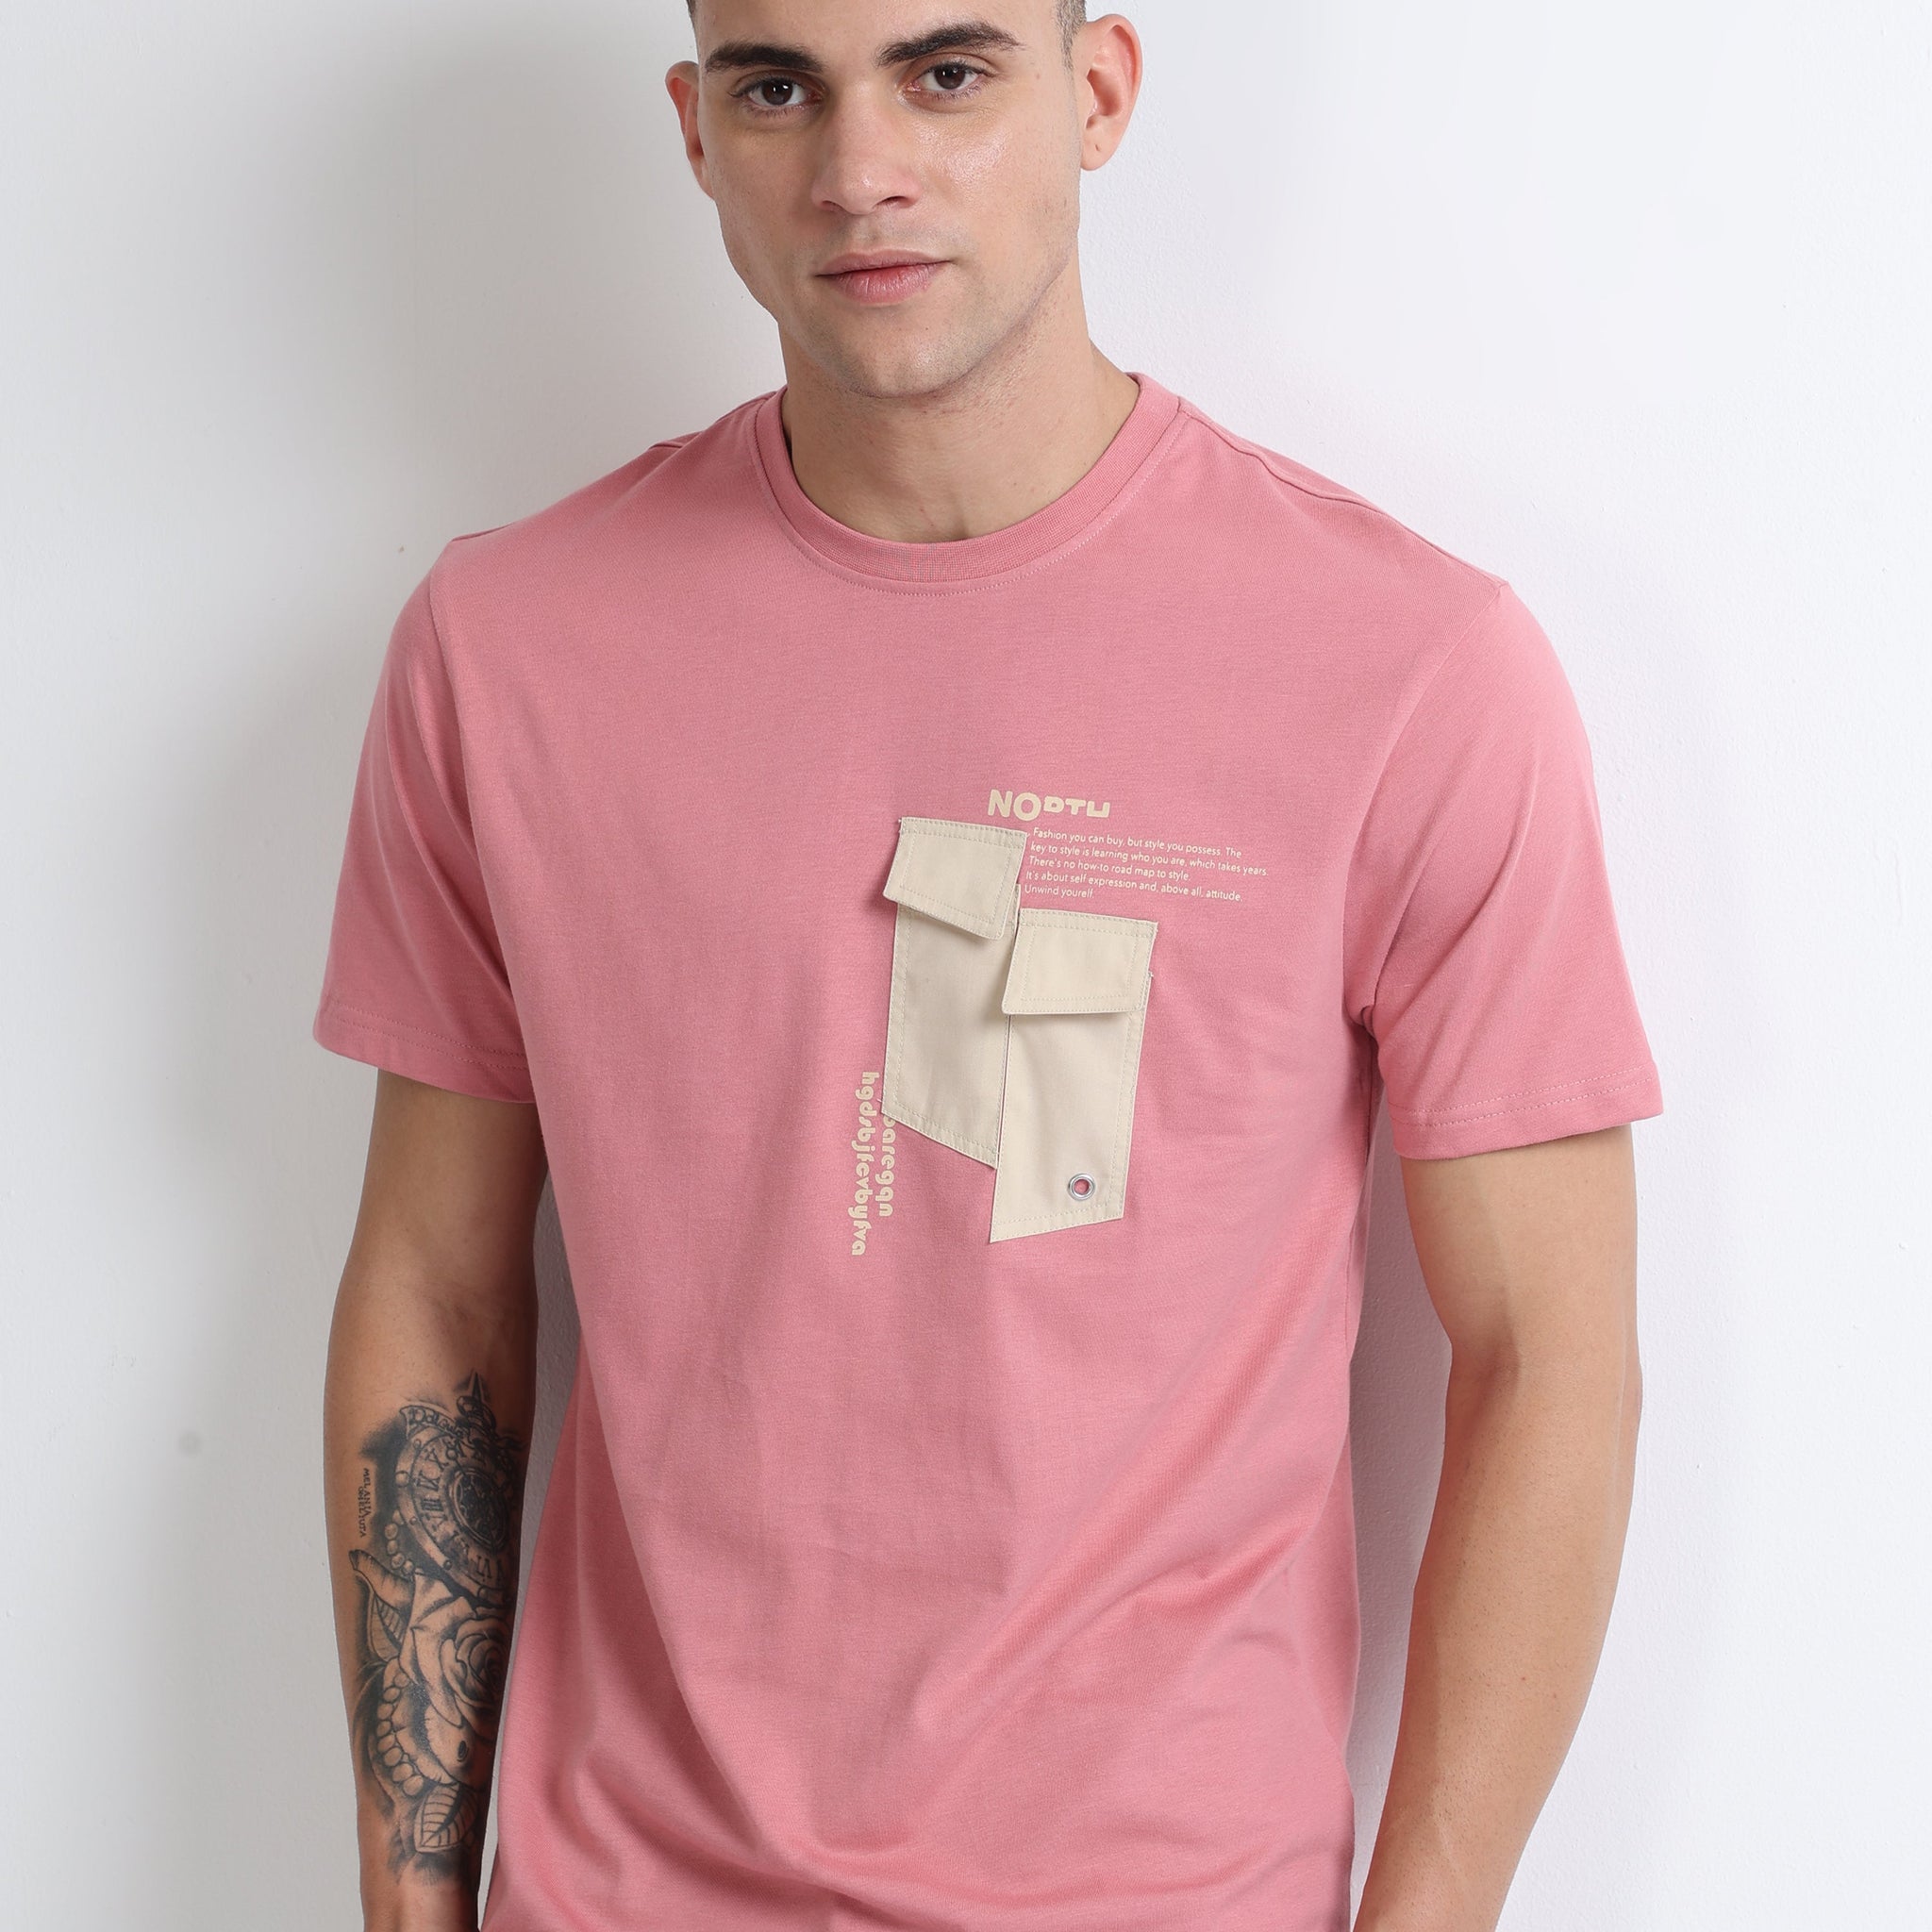 Buy Crew Neck Graphic Printed T-Shirt With Fashion Pocket Online